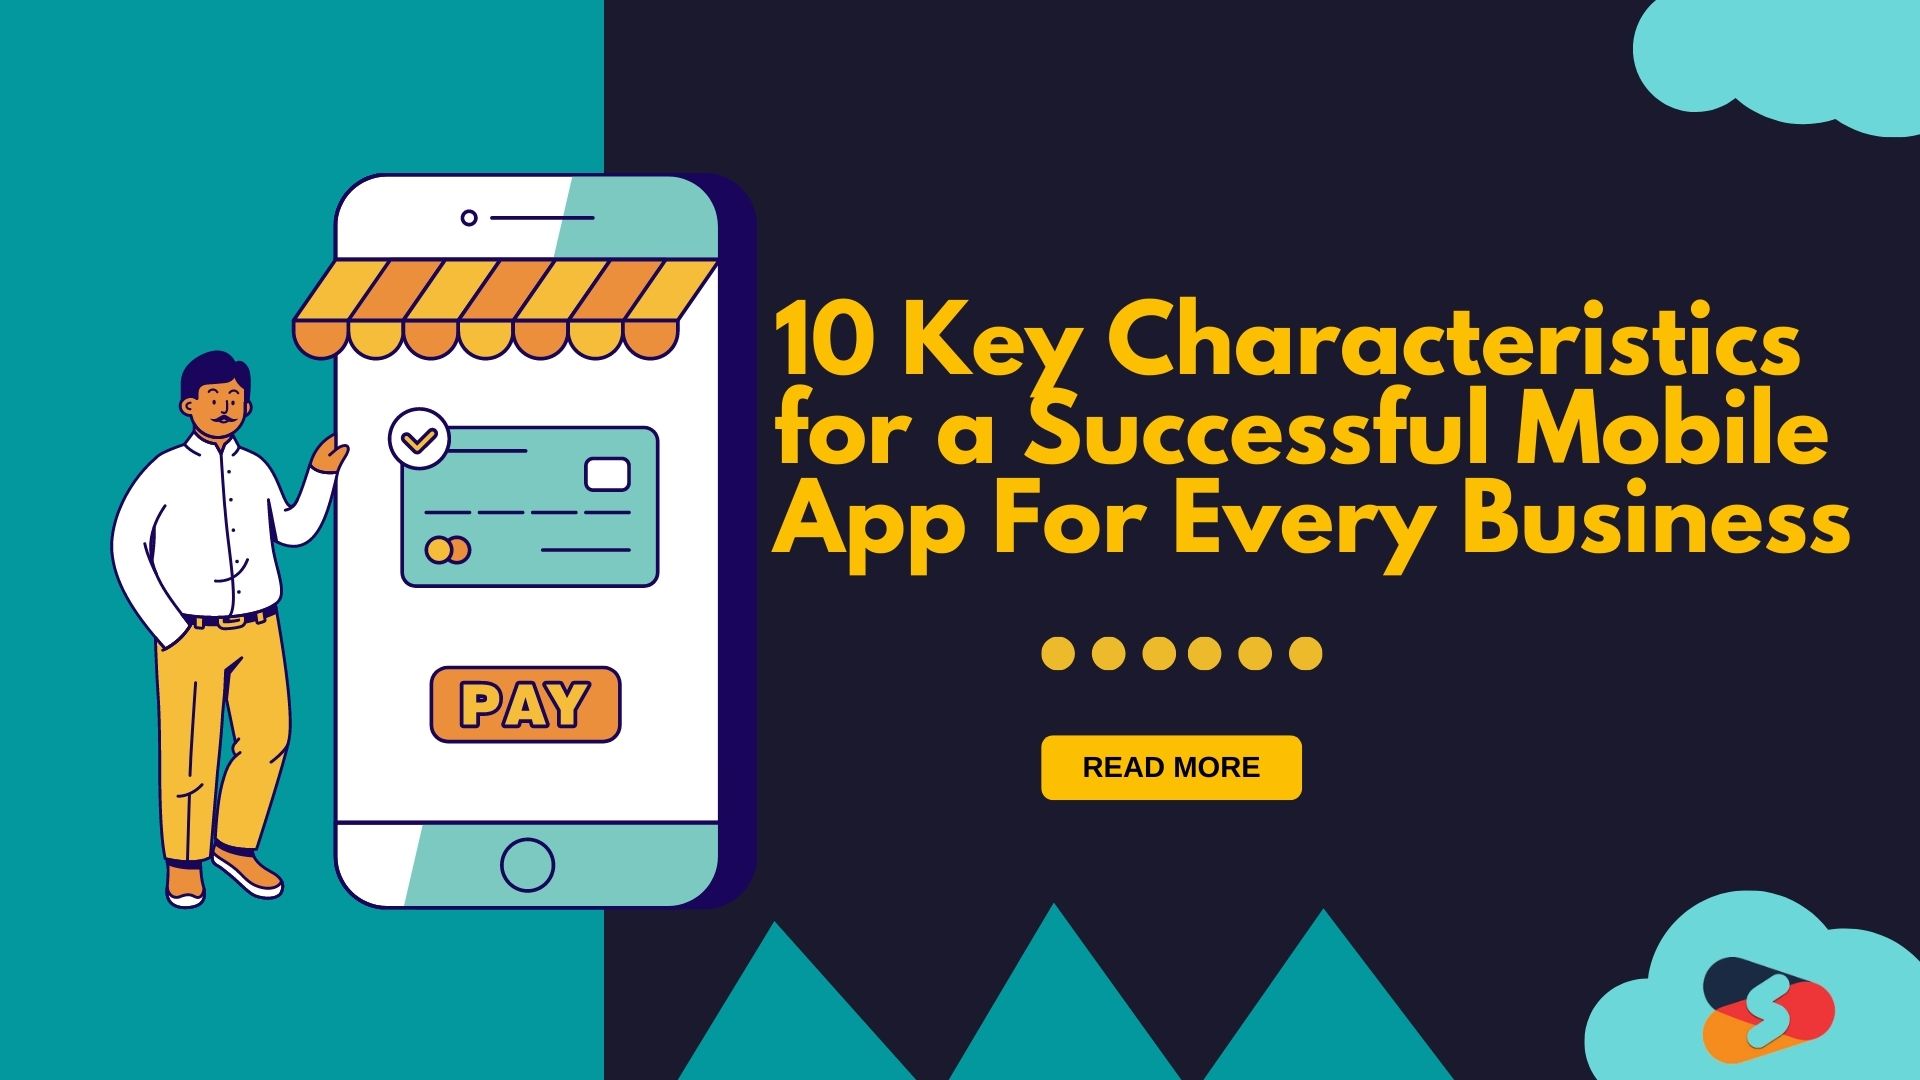 10 Key Characteristics for a Successful Mobile App for Every Business